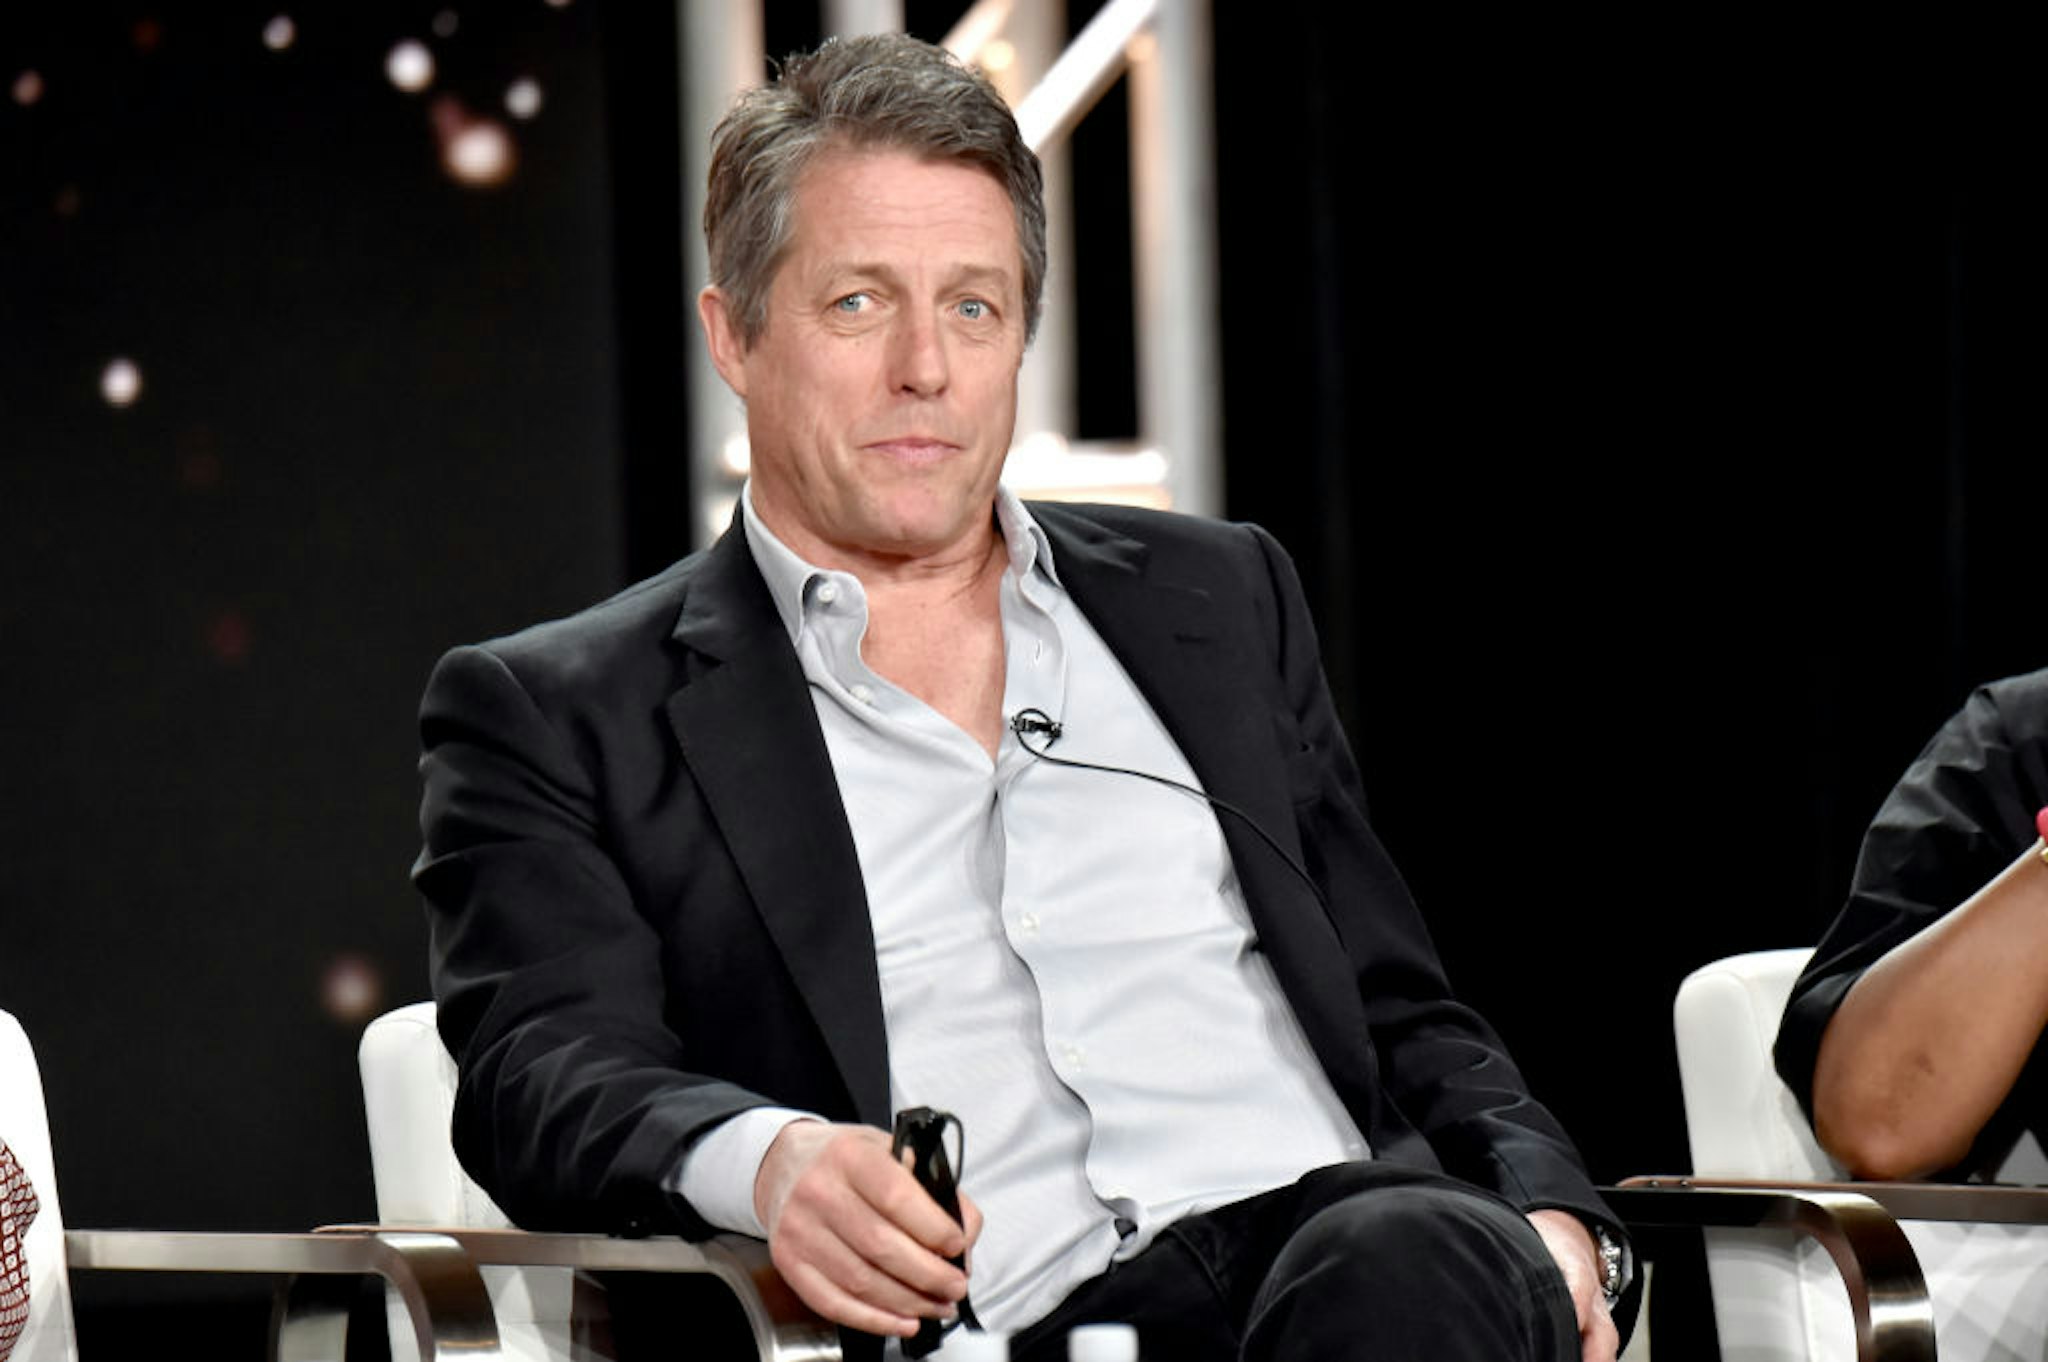 PASADENA, CALIFORNIA - JANUARY 15: Hugh Grant of 'The Undoing' appears onstage during the HBO segment of the 2020 Winter Television Critics Association Press Tour at The Langham Huntington, Pasadena on January 15, 2020 in Pasadena, California. 723750 (Photo by Jeff Kravitz/Getty Images for WarnerMedia)